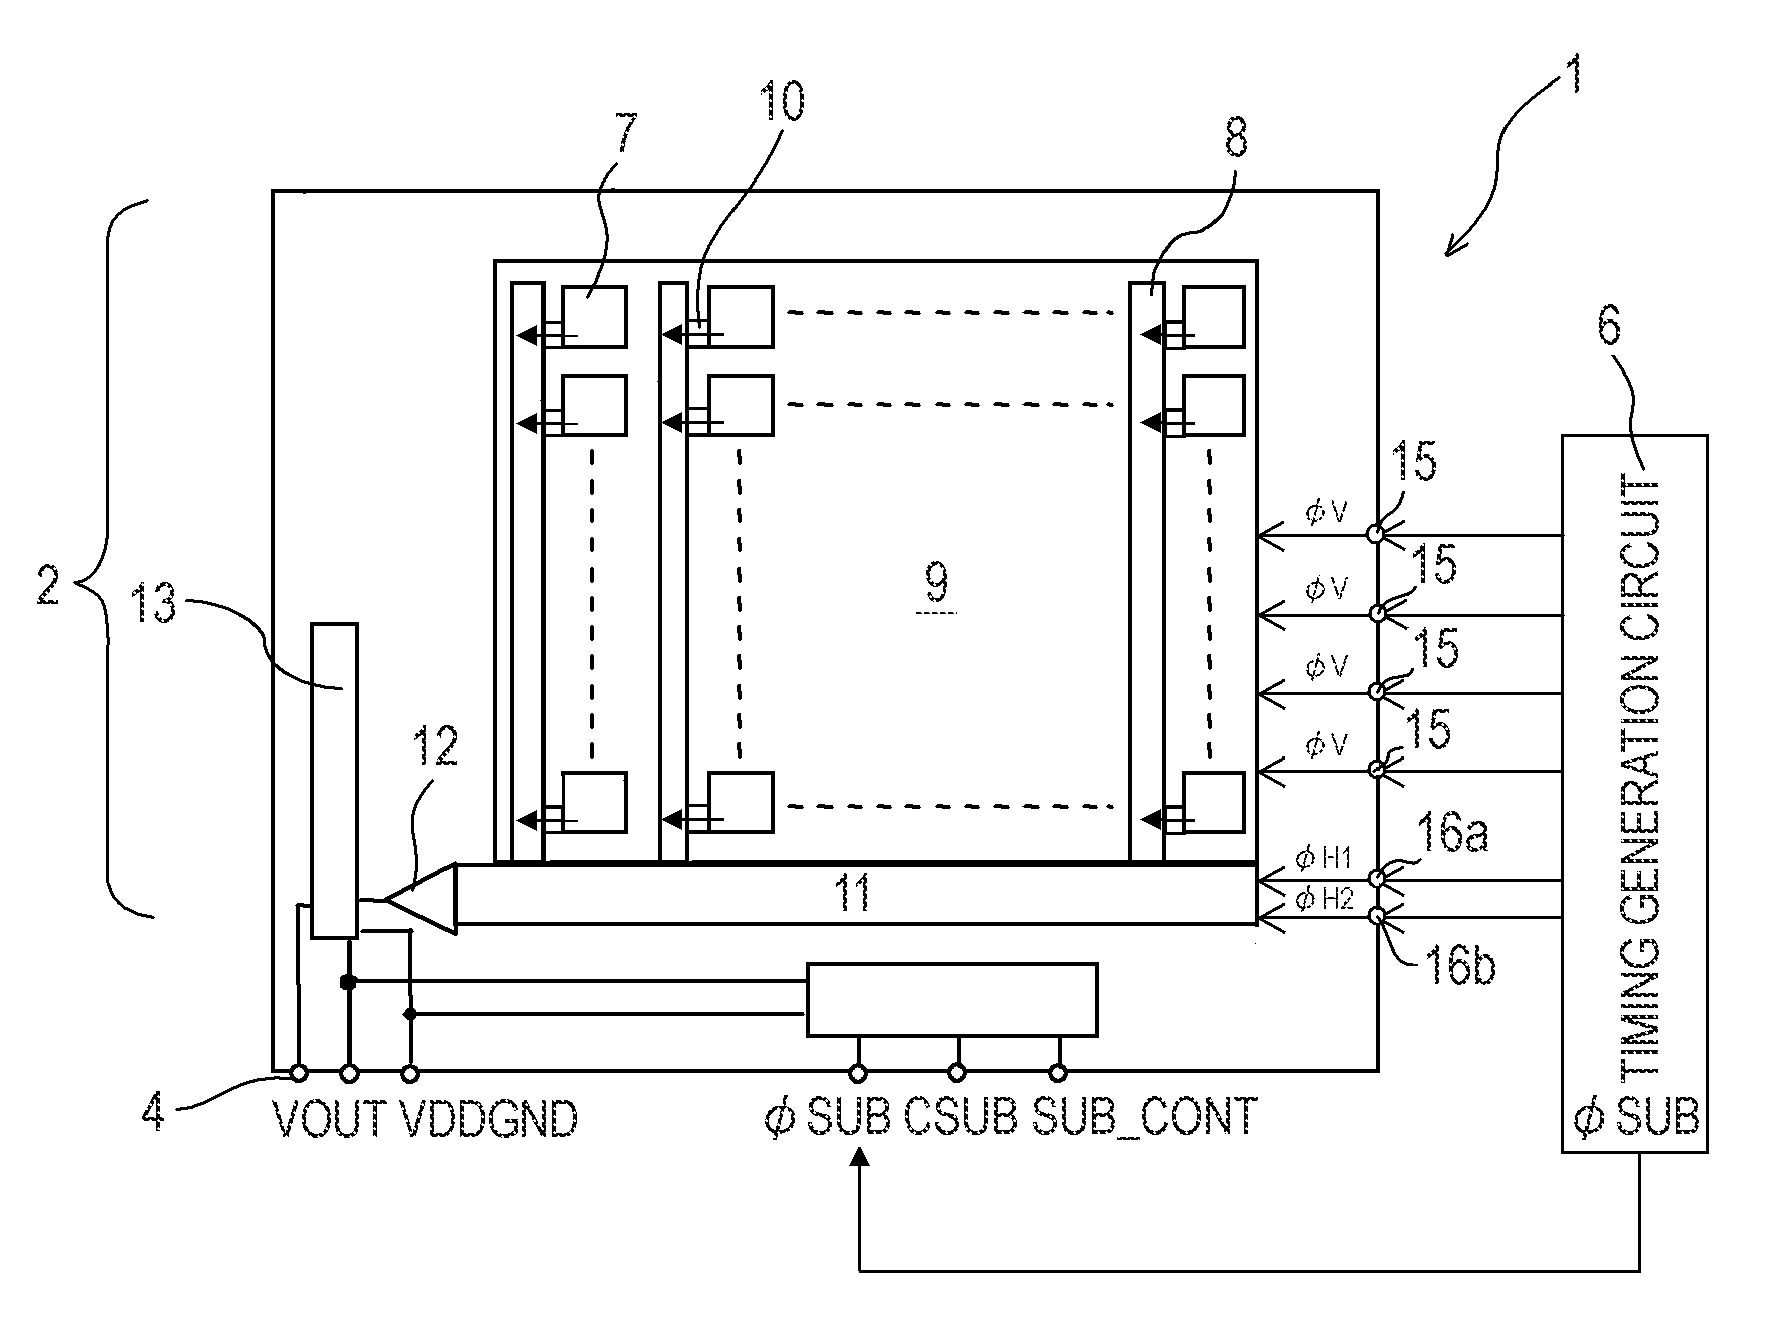 Solid-state imaging device, driving method thereof, and imaging apparatus